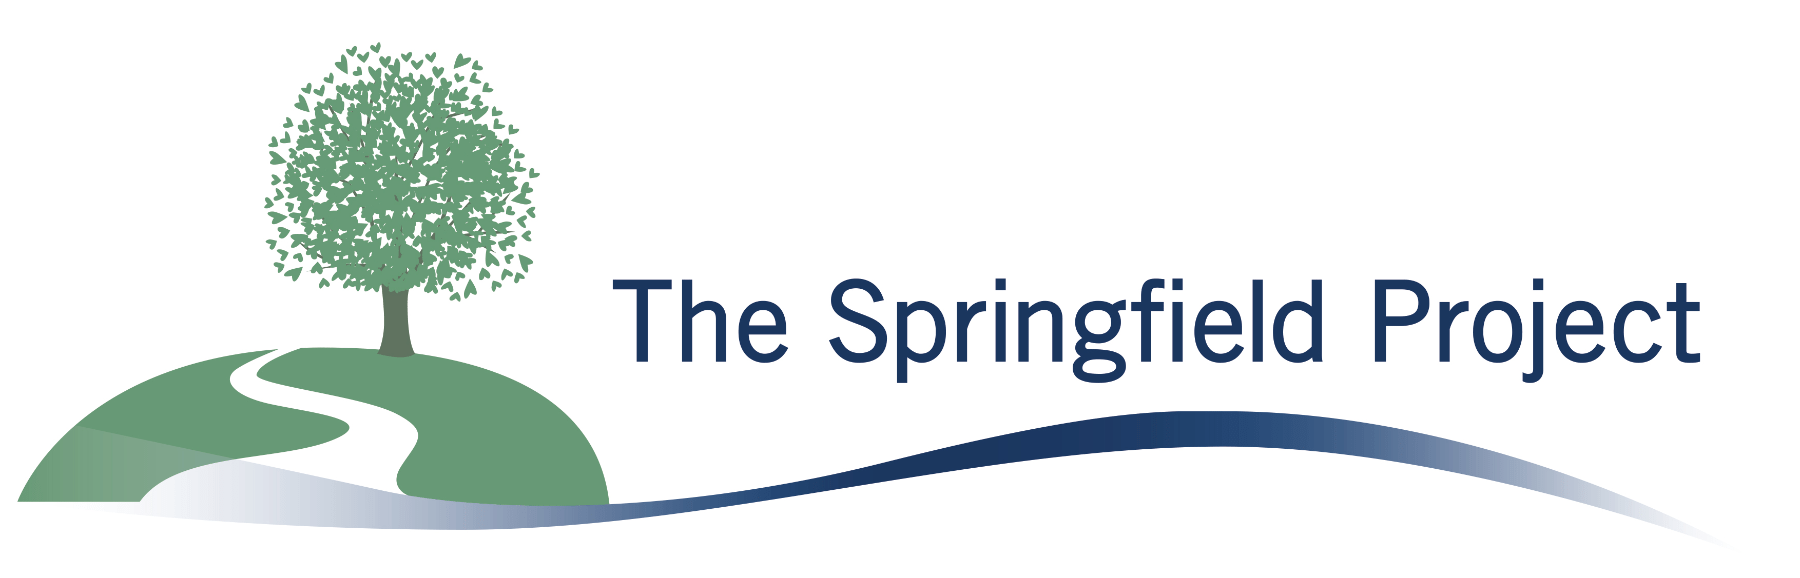 Springfield Logo - The Springfield Project | Charity in Sparkhill, Birmingham